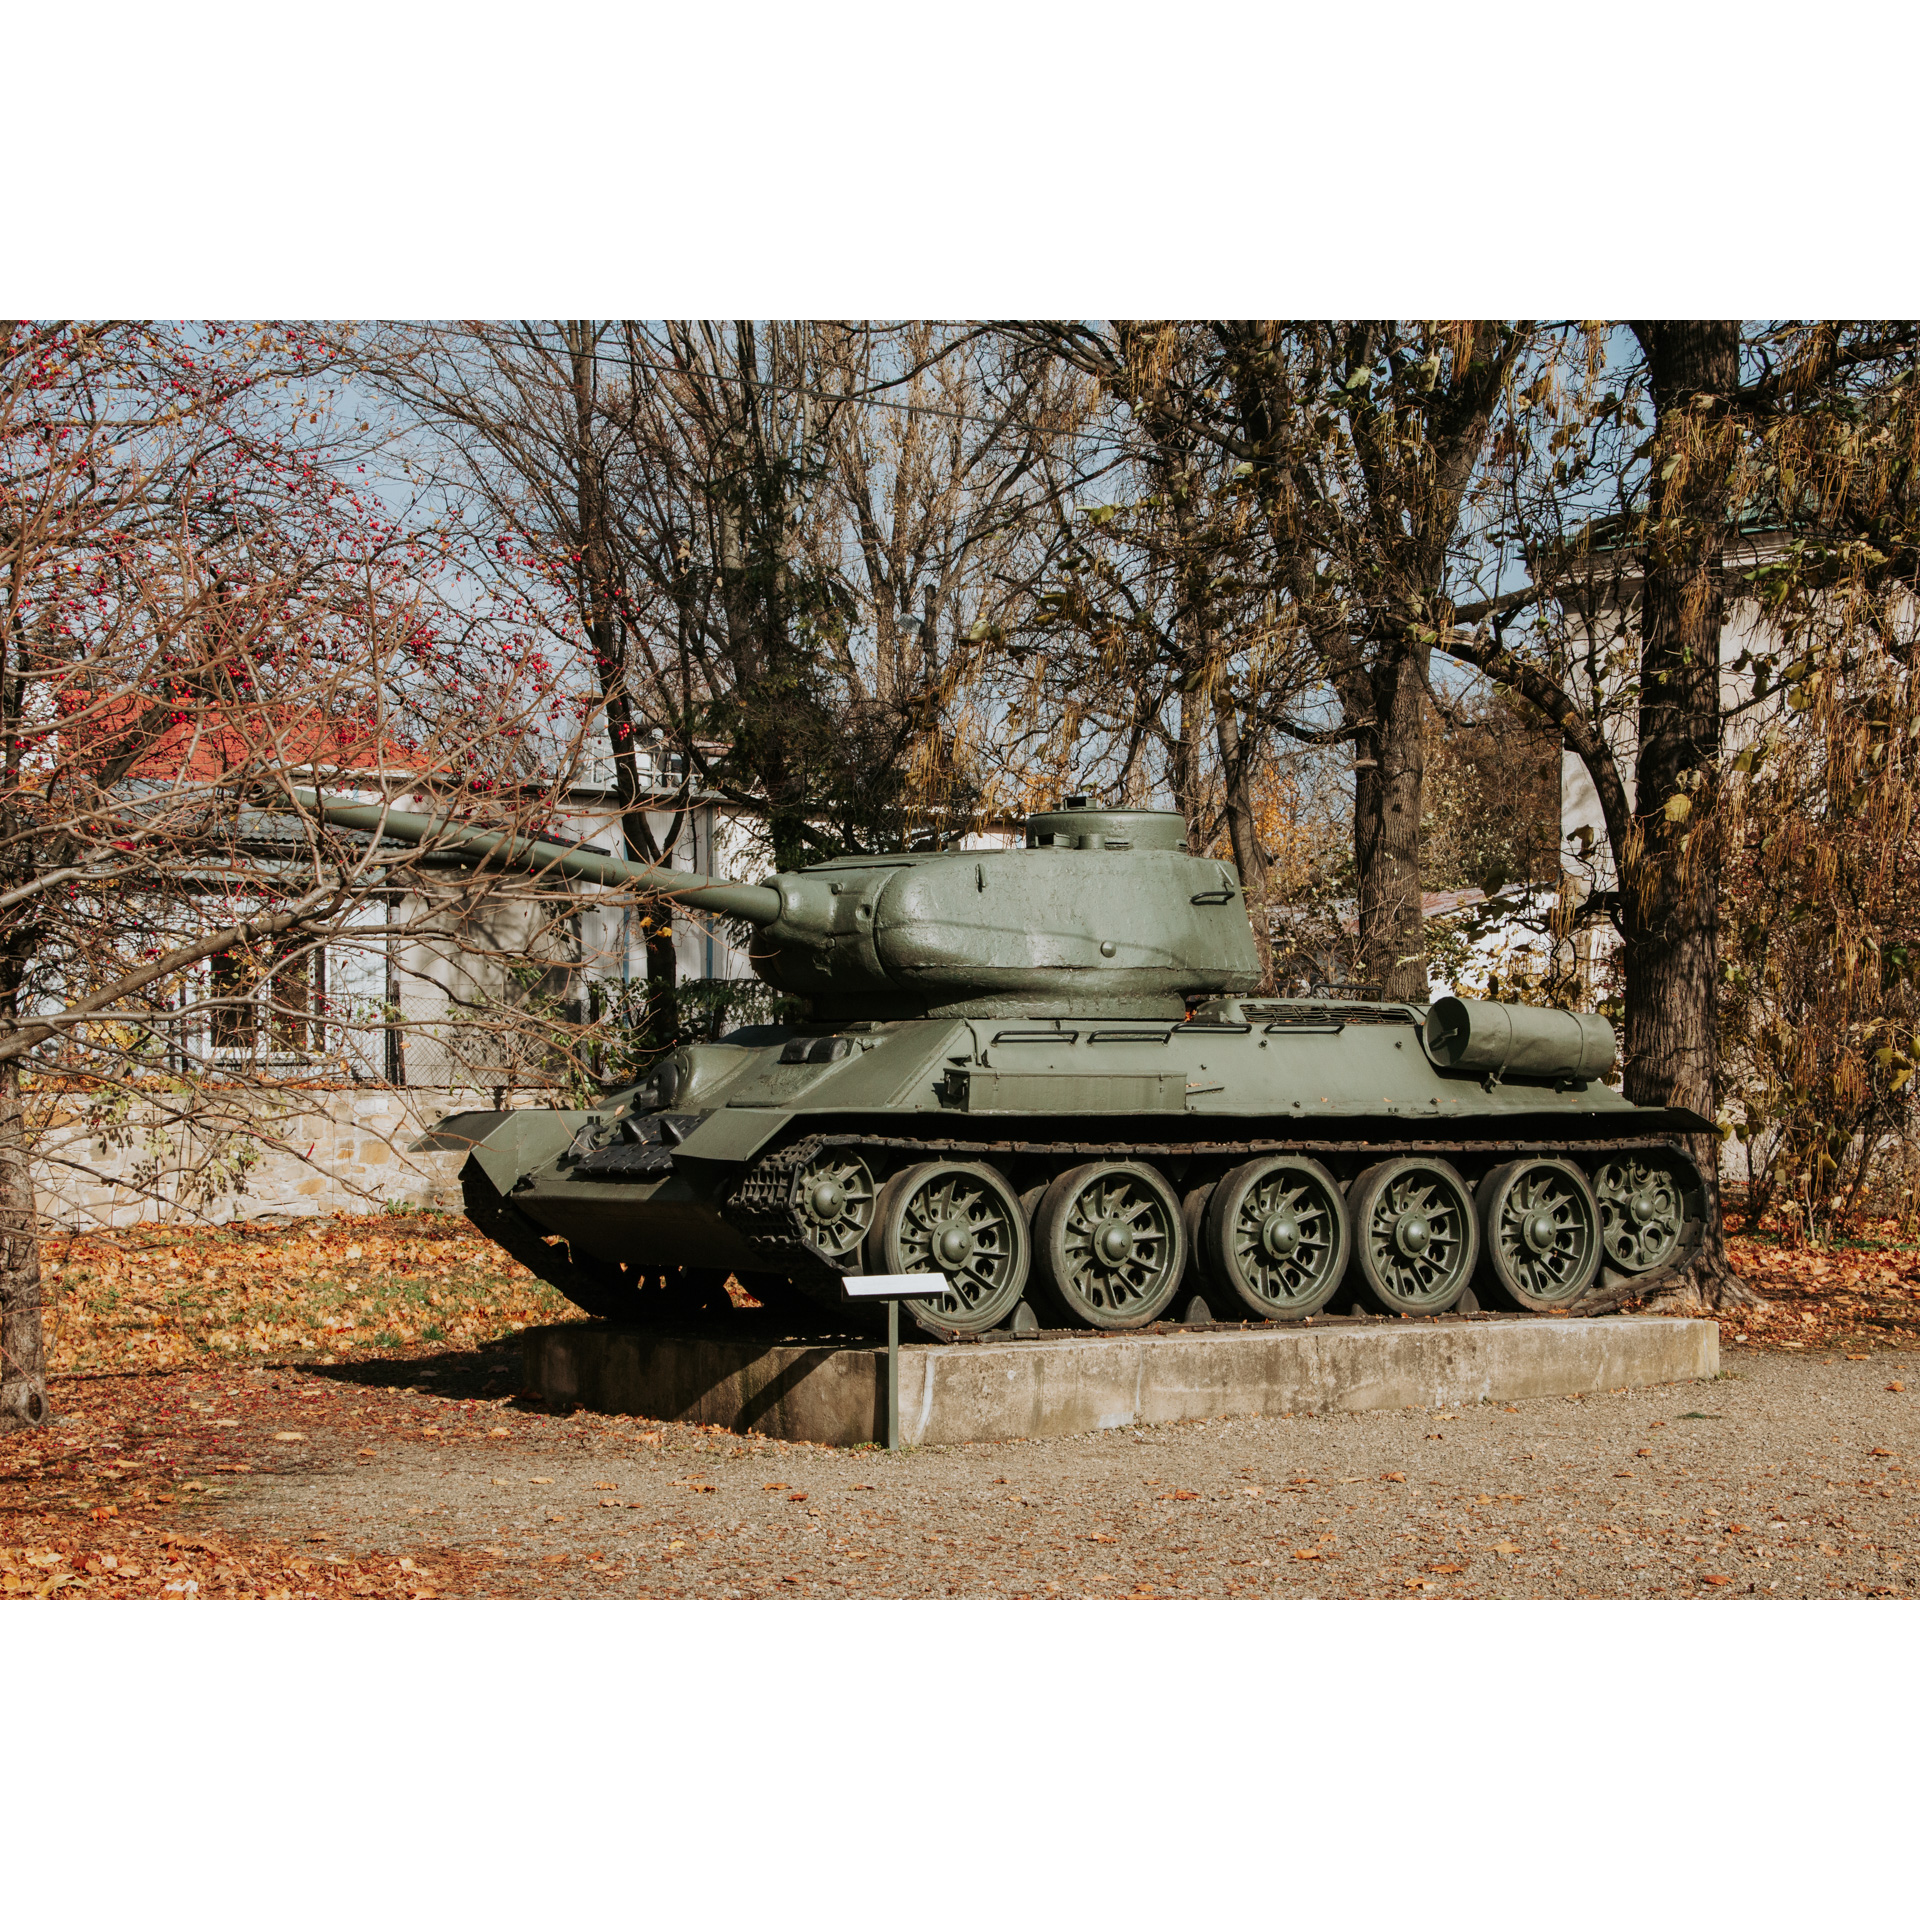 A historic tank standing on a brick platform against the background of trees